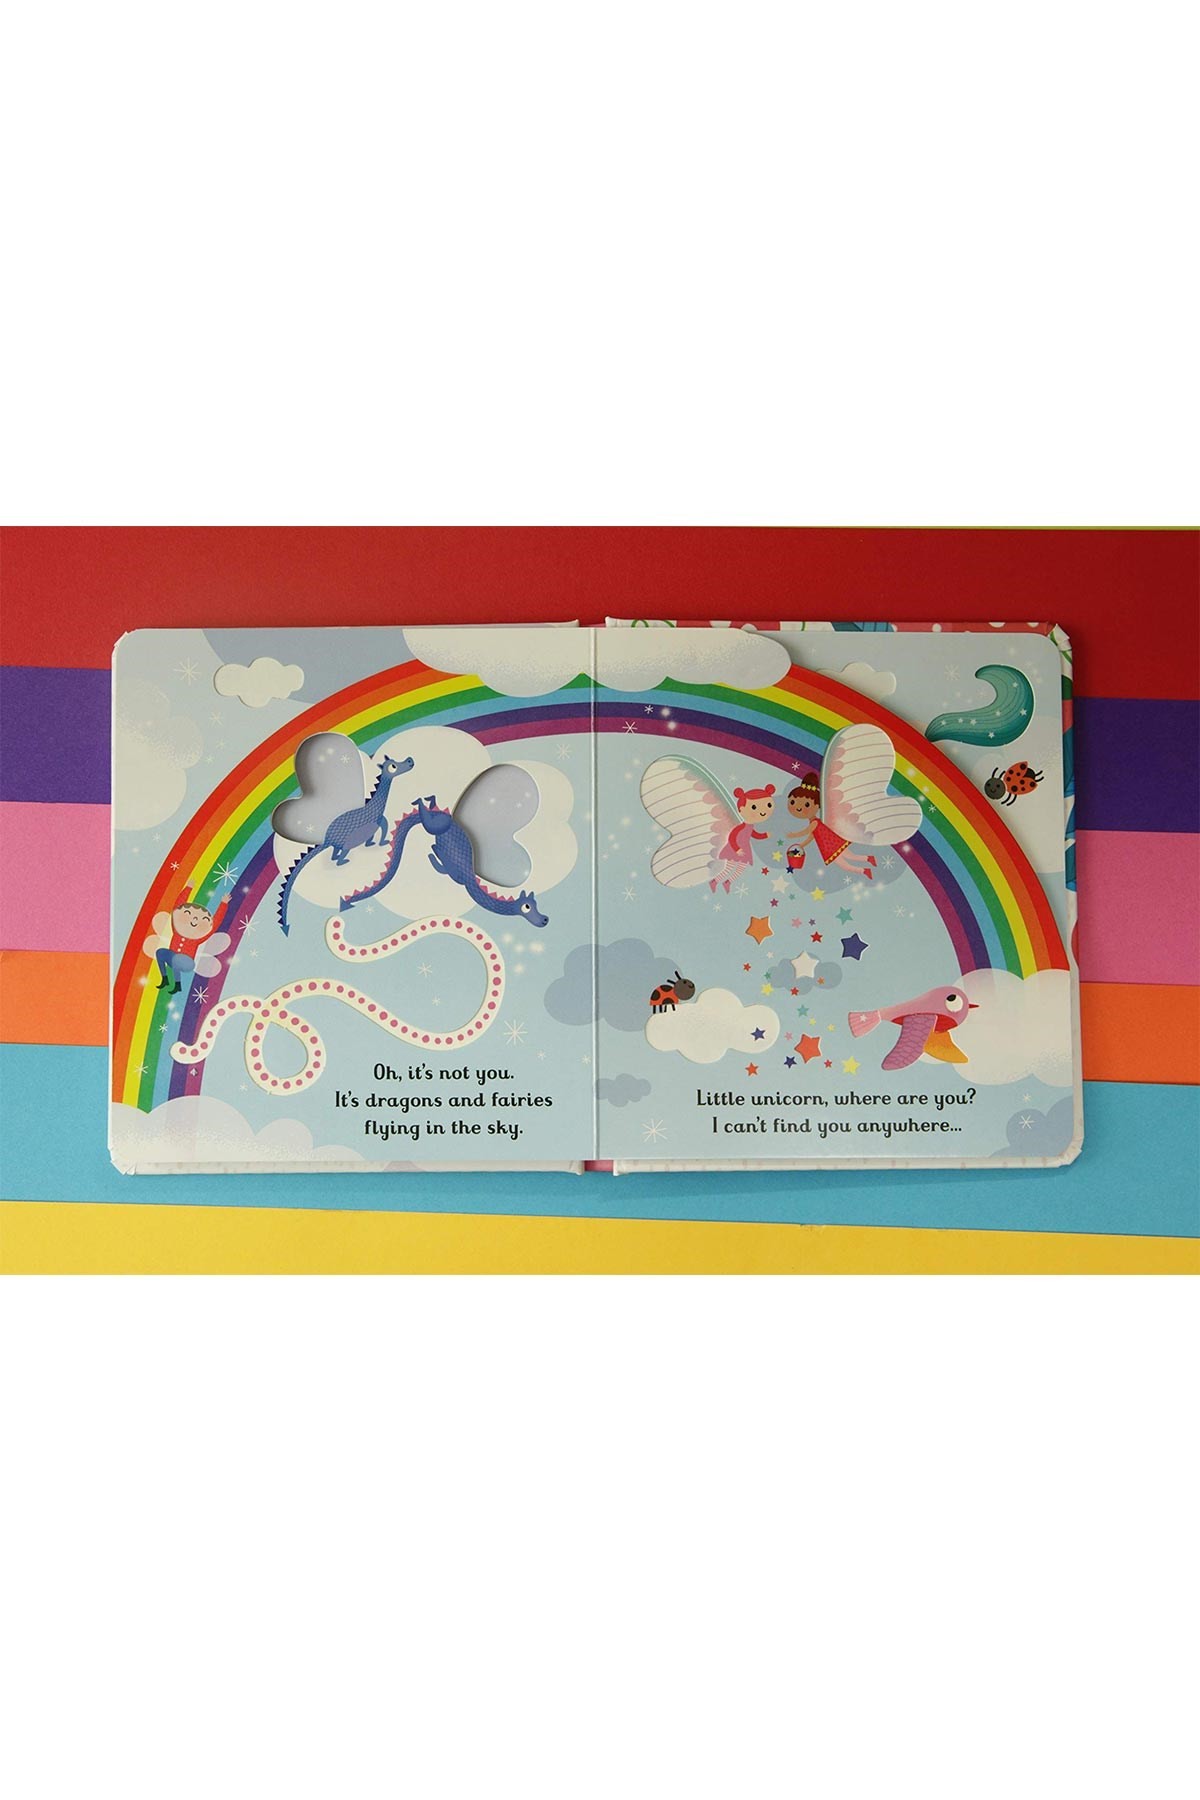 The Usborne Are You There Little Unicorn?